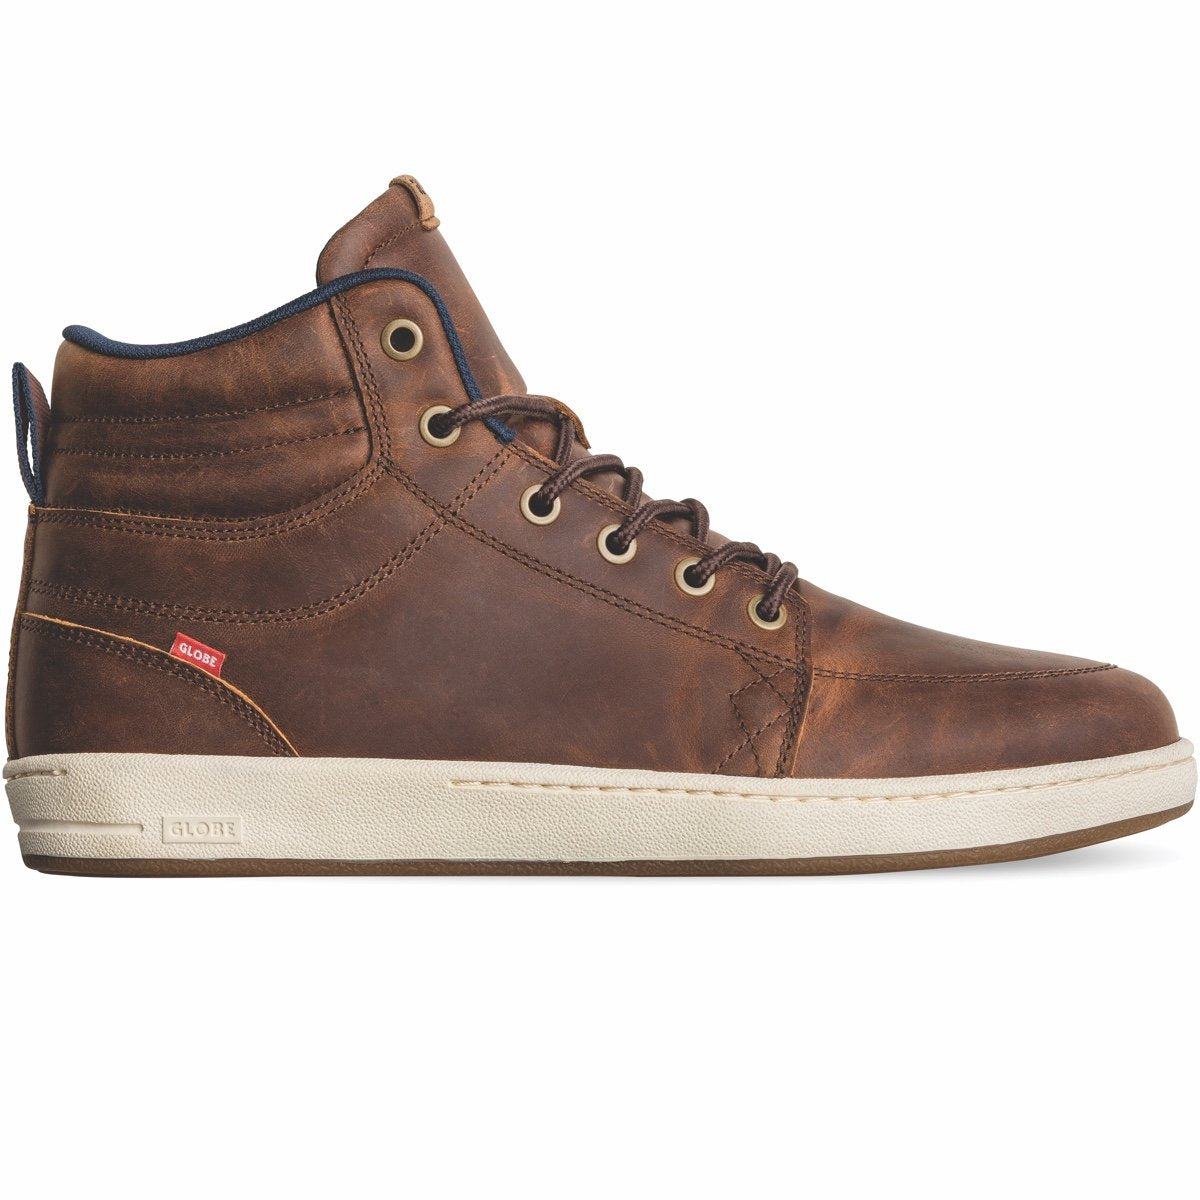 GLOBE GS BOOT BROWN LEATHER